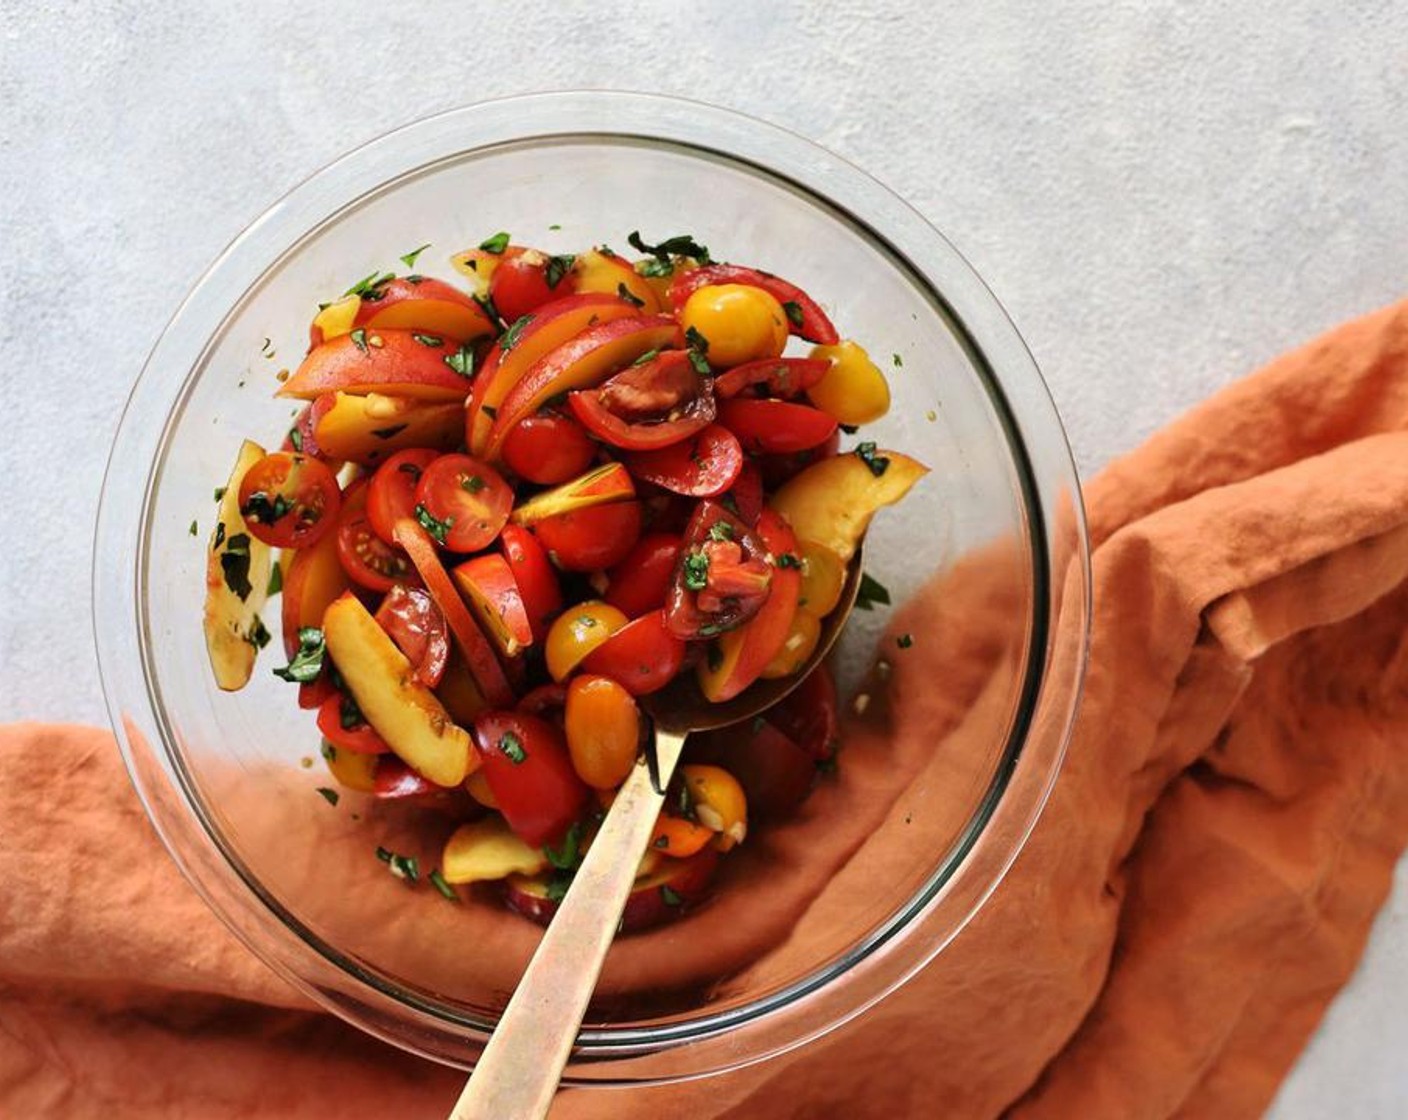 step 1 Chop or slice Peaches (2) and Heirloom Tomatoes (2 1/2 cups) to your preferred sizes and place in a medium bowl with the Fresh Basil (1/3 cup), Fresh Oregano (2 Tbsp), Elephant Garlic (1 Tbsp), Extra-Virgin Olive Oil (2 Tbsp), Balsamic Glaze (1 Tbsp), and Salt (1 tsp). Toss. Set aside and leave to macerate for about 10 minutes.